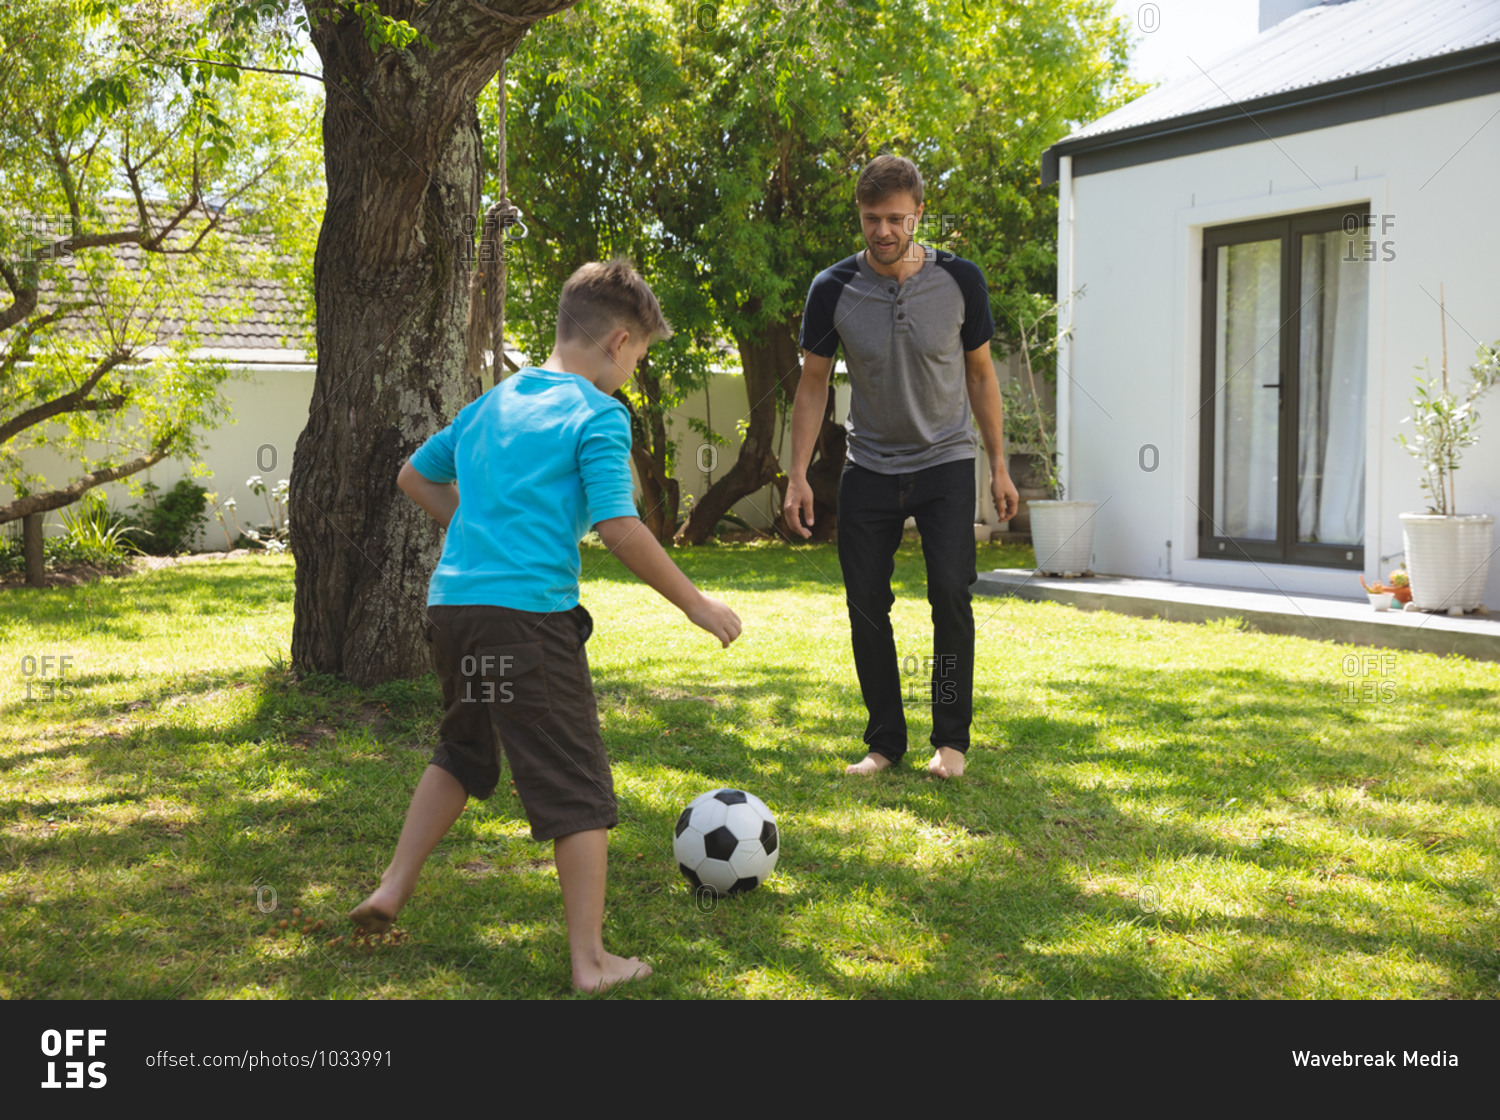 Caucasian man spending time with his son together, playing football in garden. Social distancing during Covid 19 Coronavirus quarantine lockdown.